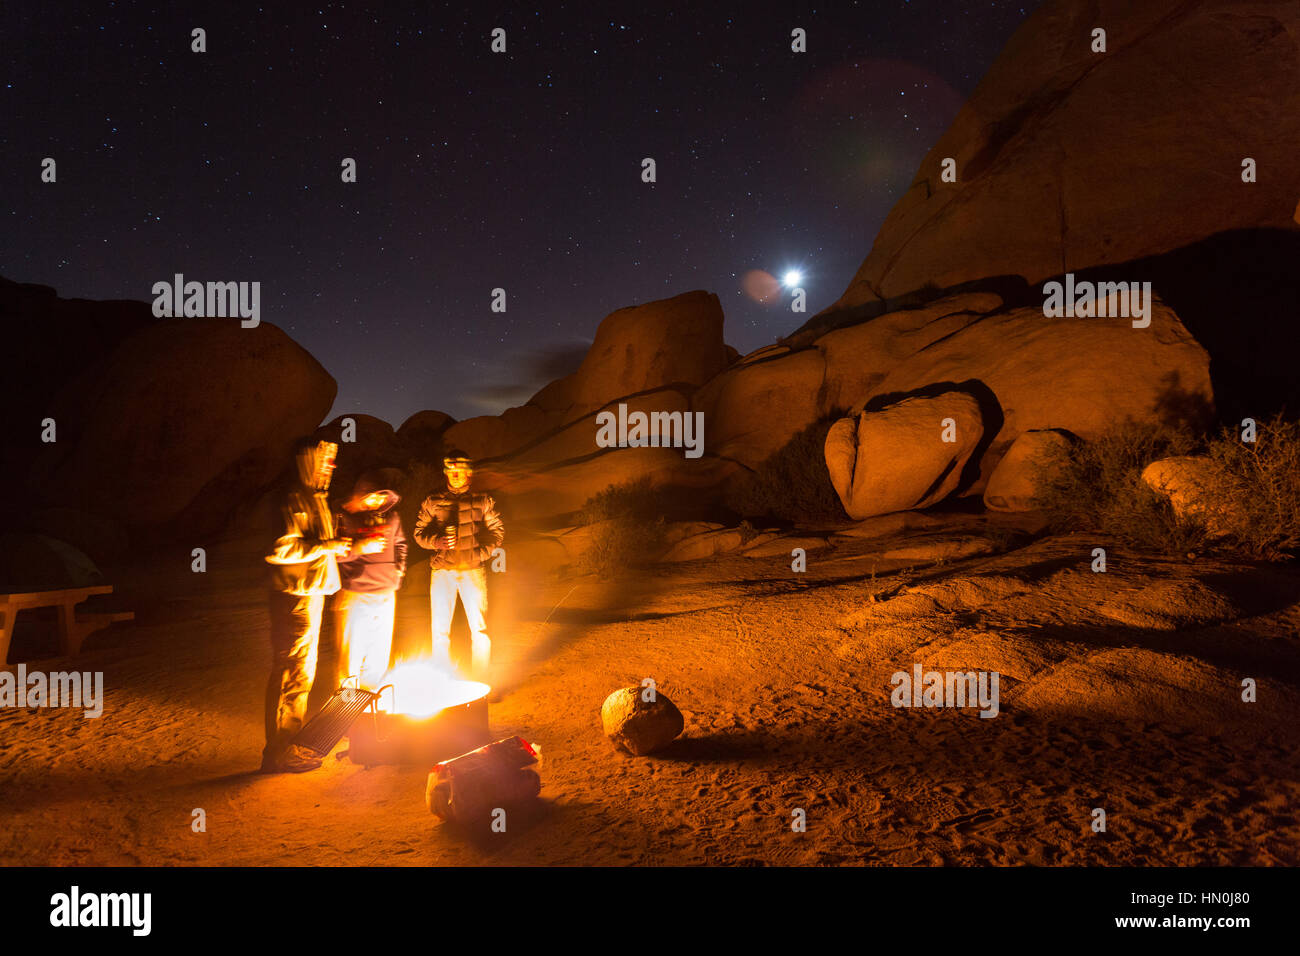 Three friends stand near the campfire for warmth on a cold, windy night in Joshua Tree National Park. Stock Photo